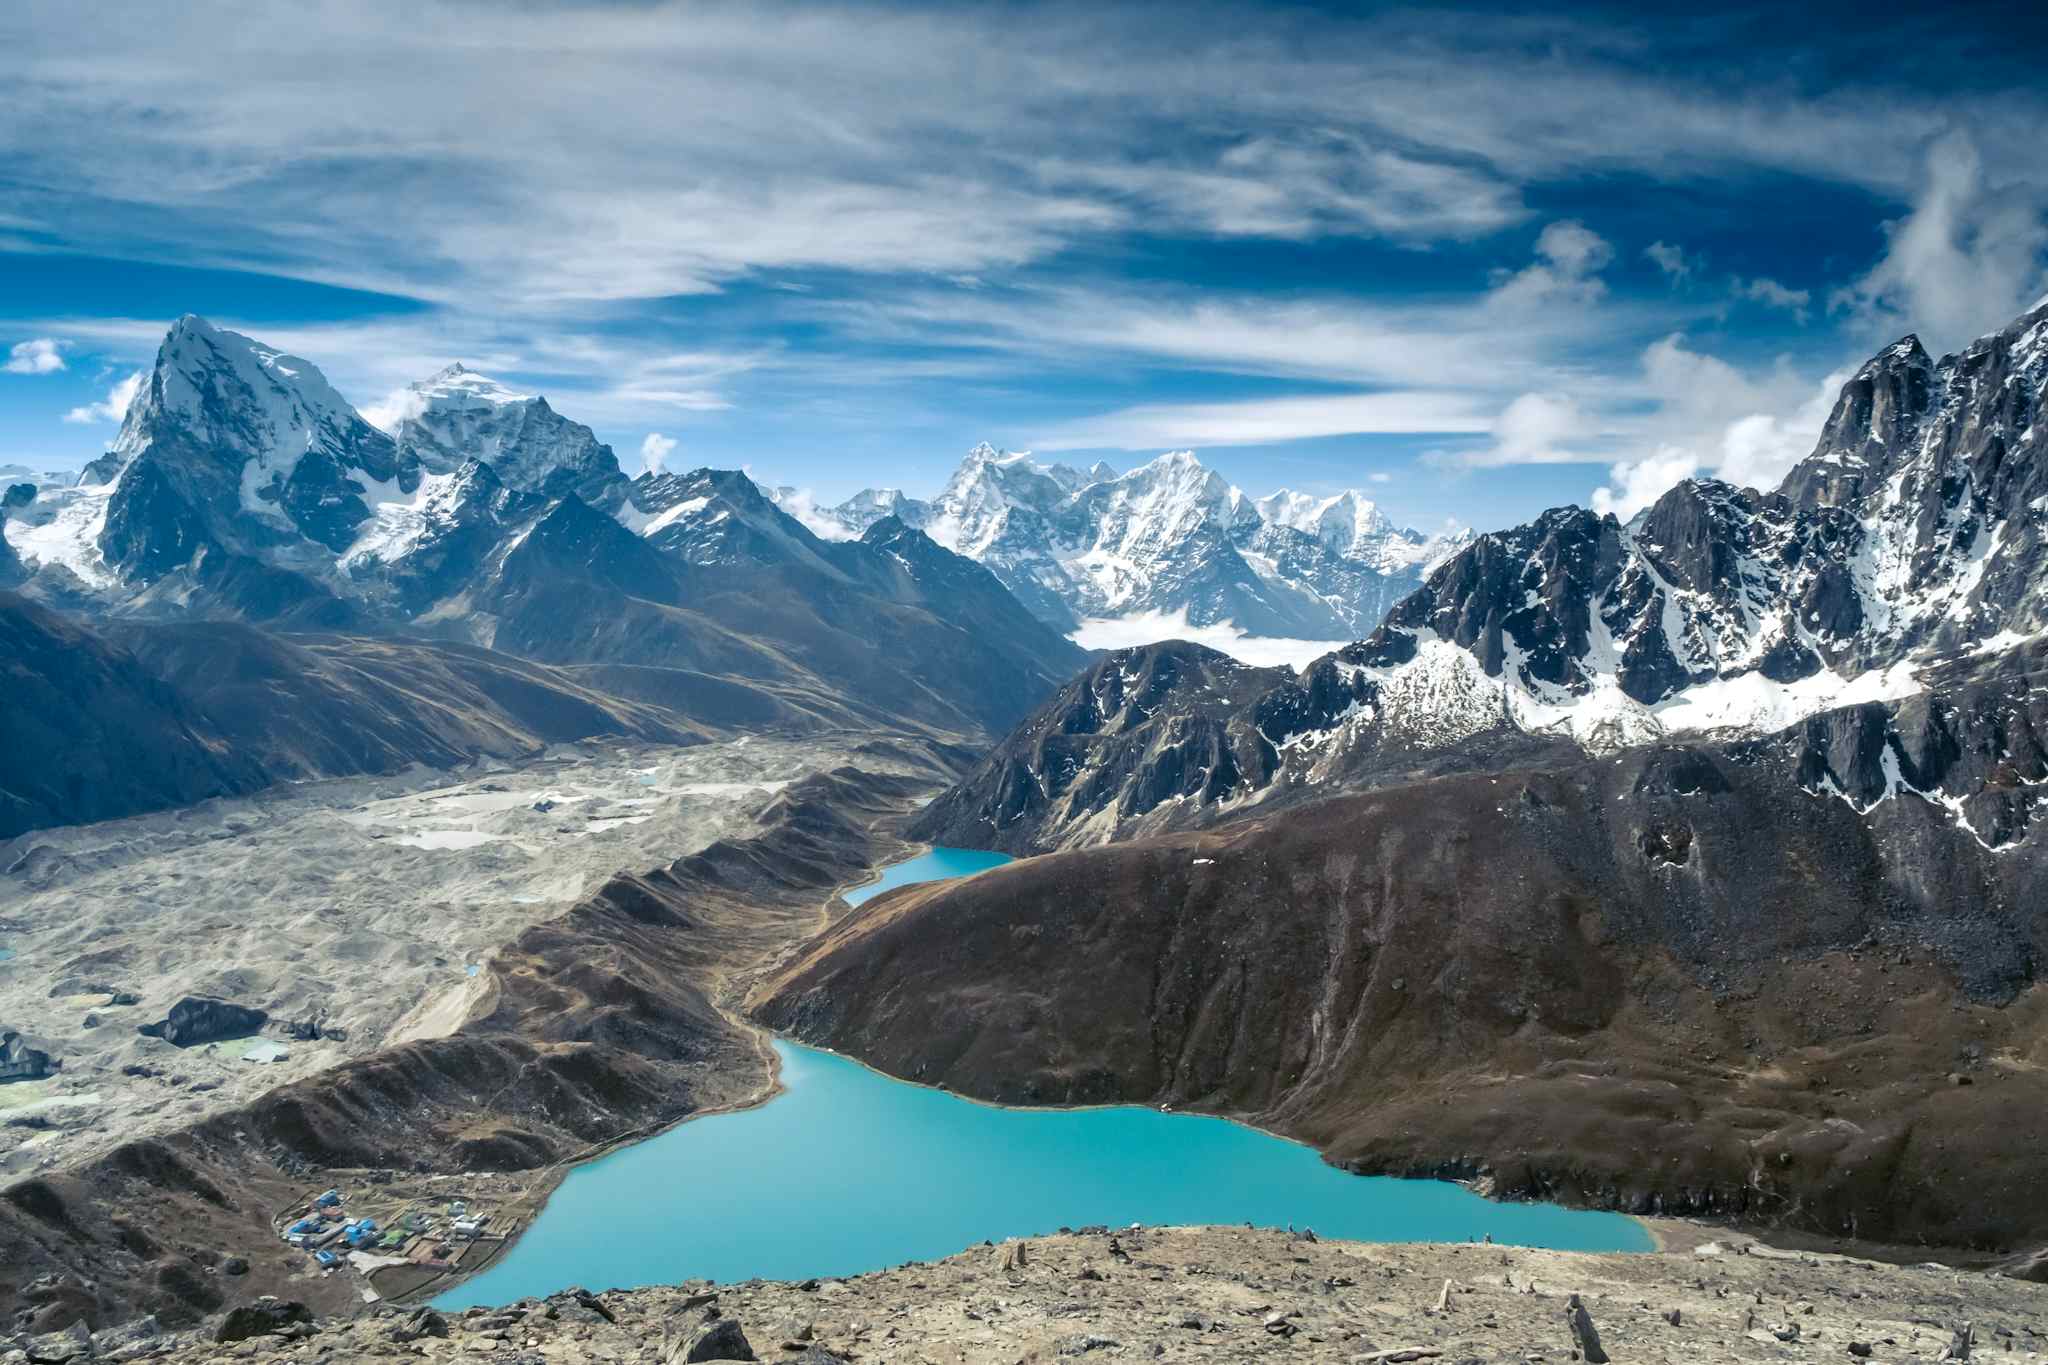 A glacial lake in the Gokyo Valley, Nepal Himalayas. Photo: Getty.